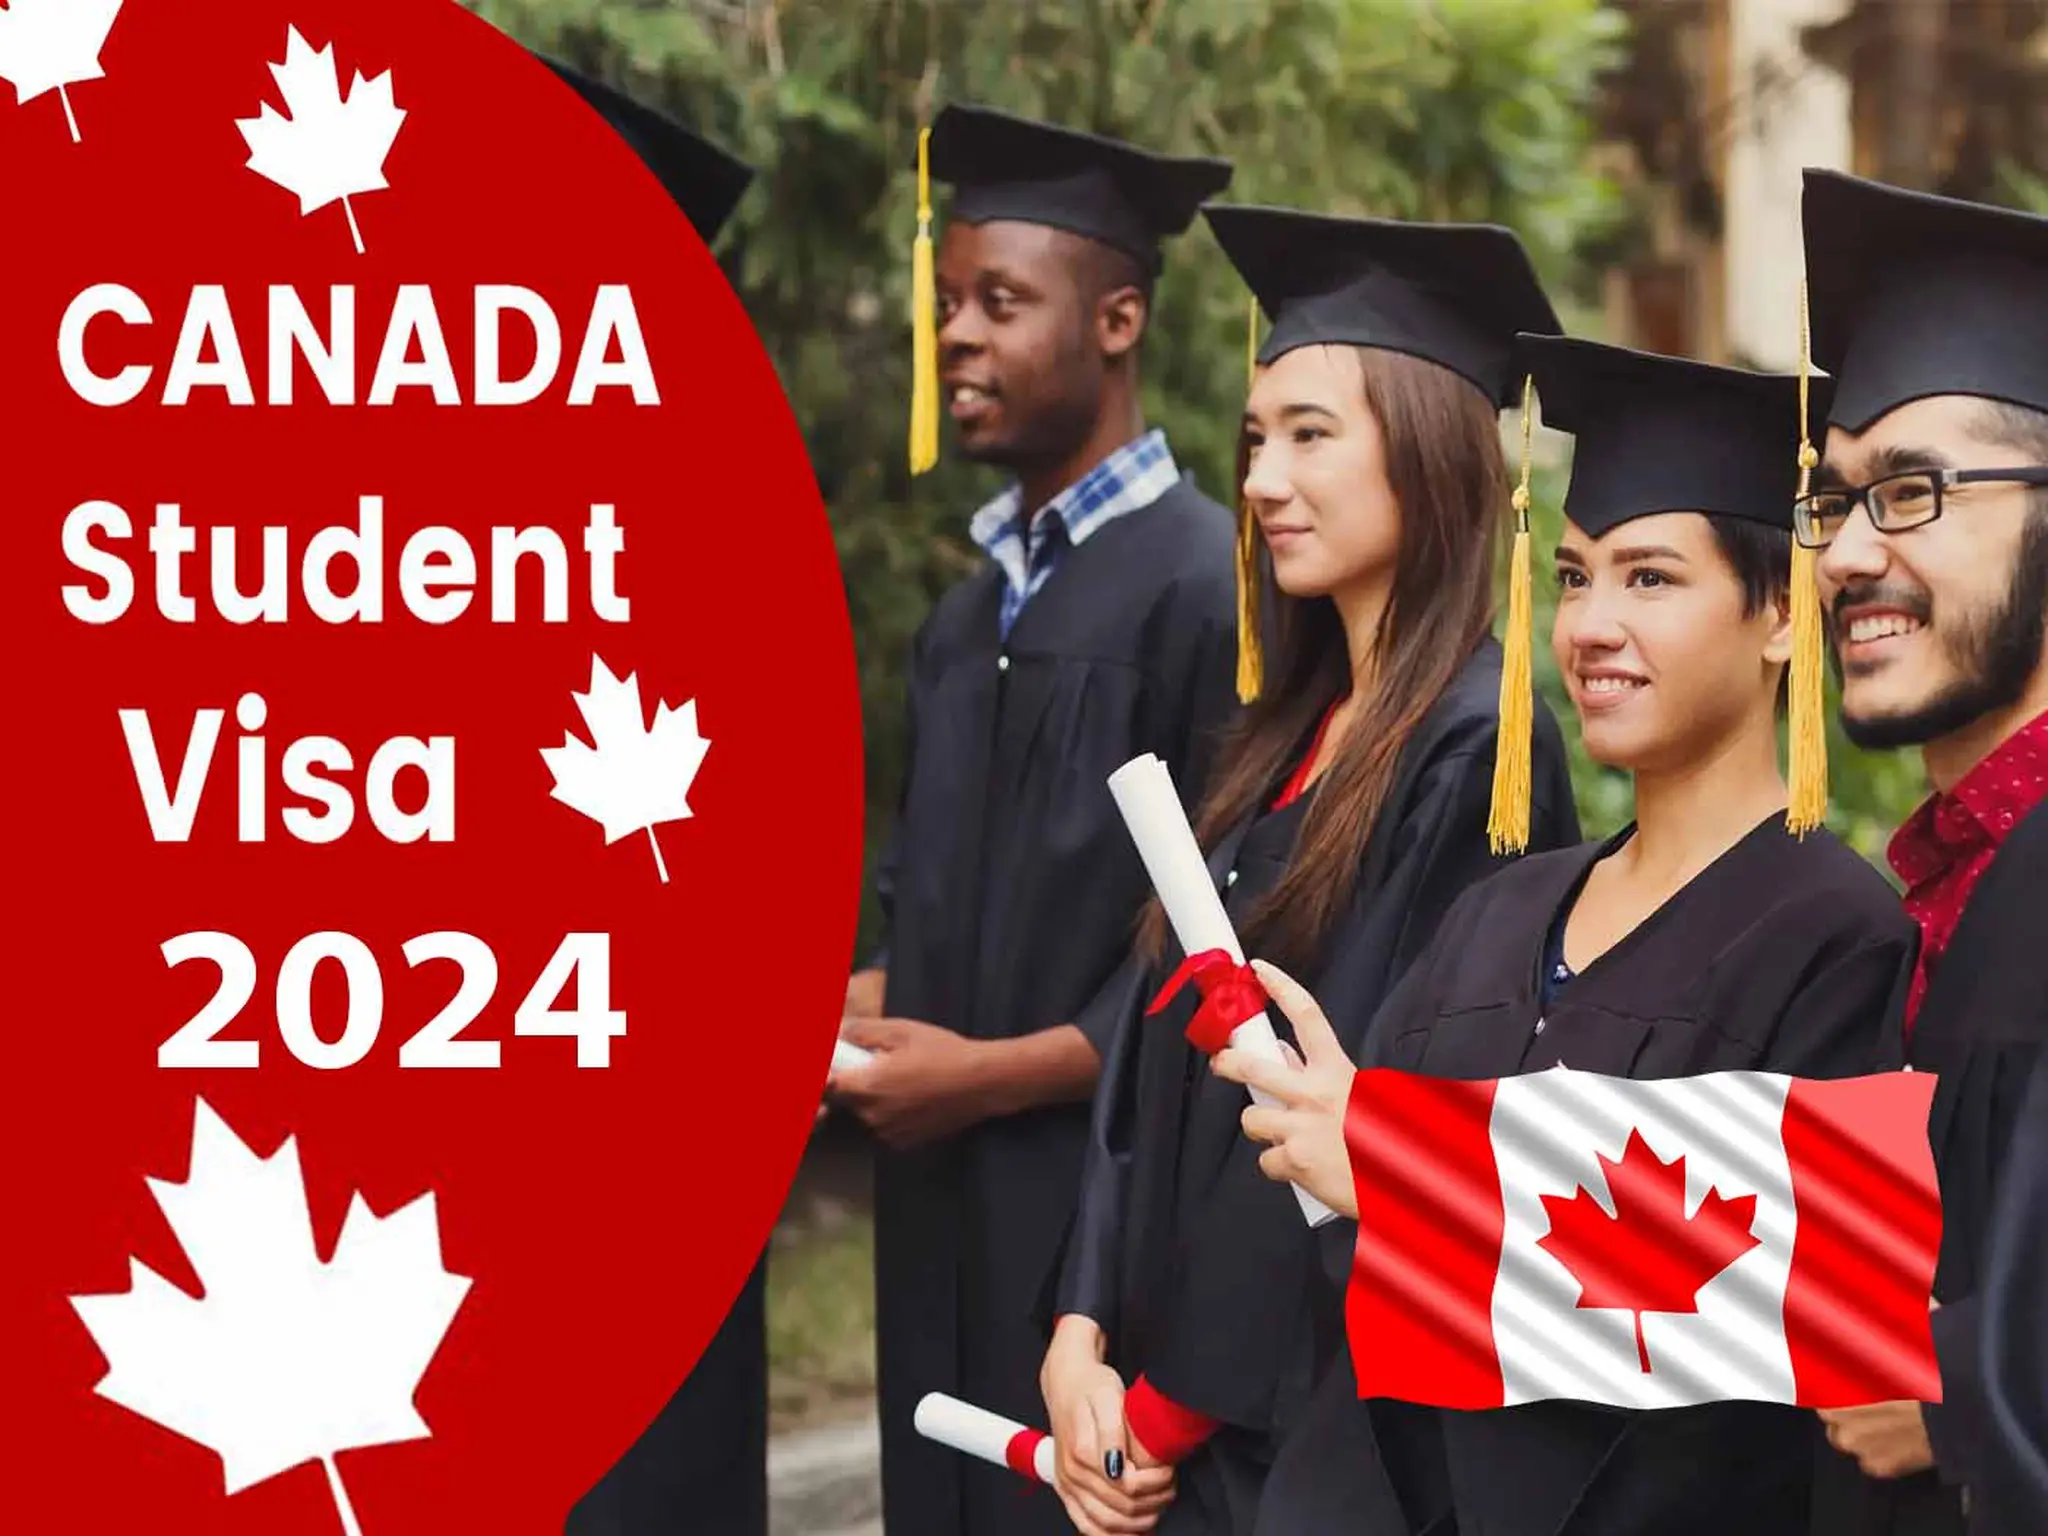 Canada announces an increase in the cost of living for international students